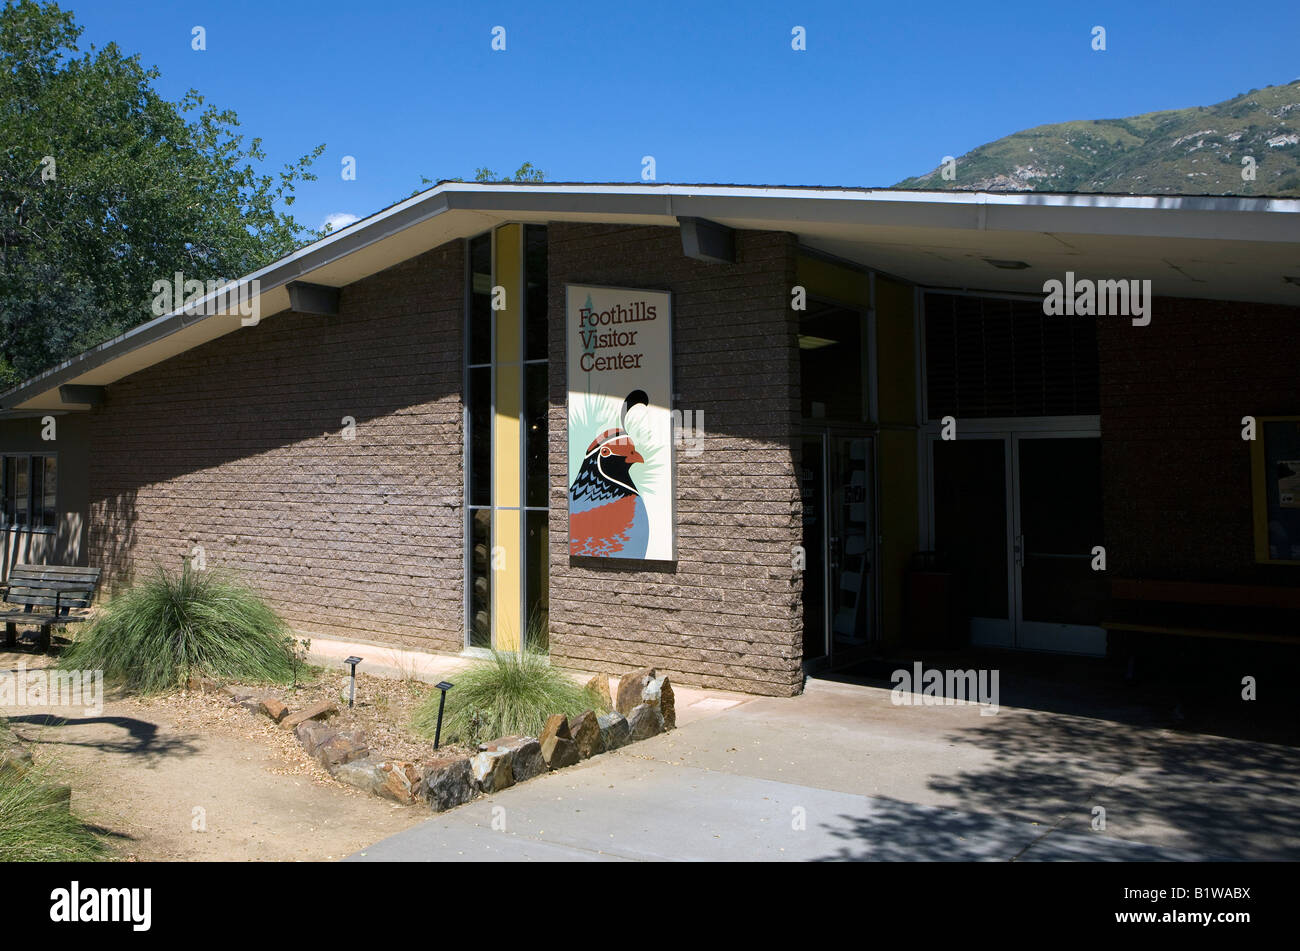 The Foothills Visitor Center, located near the Ash Mountain Entrance, Sequoia National Park, California, USA. Stock Photo